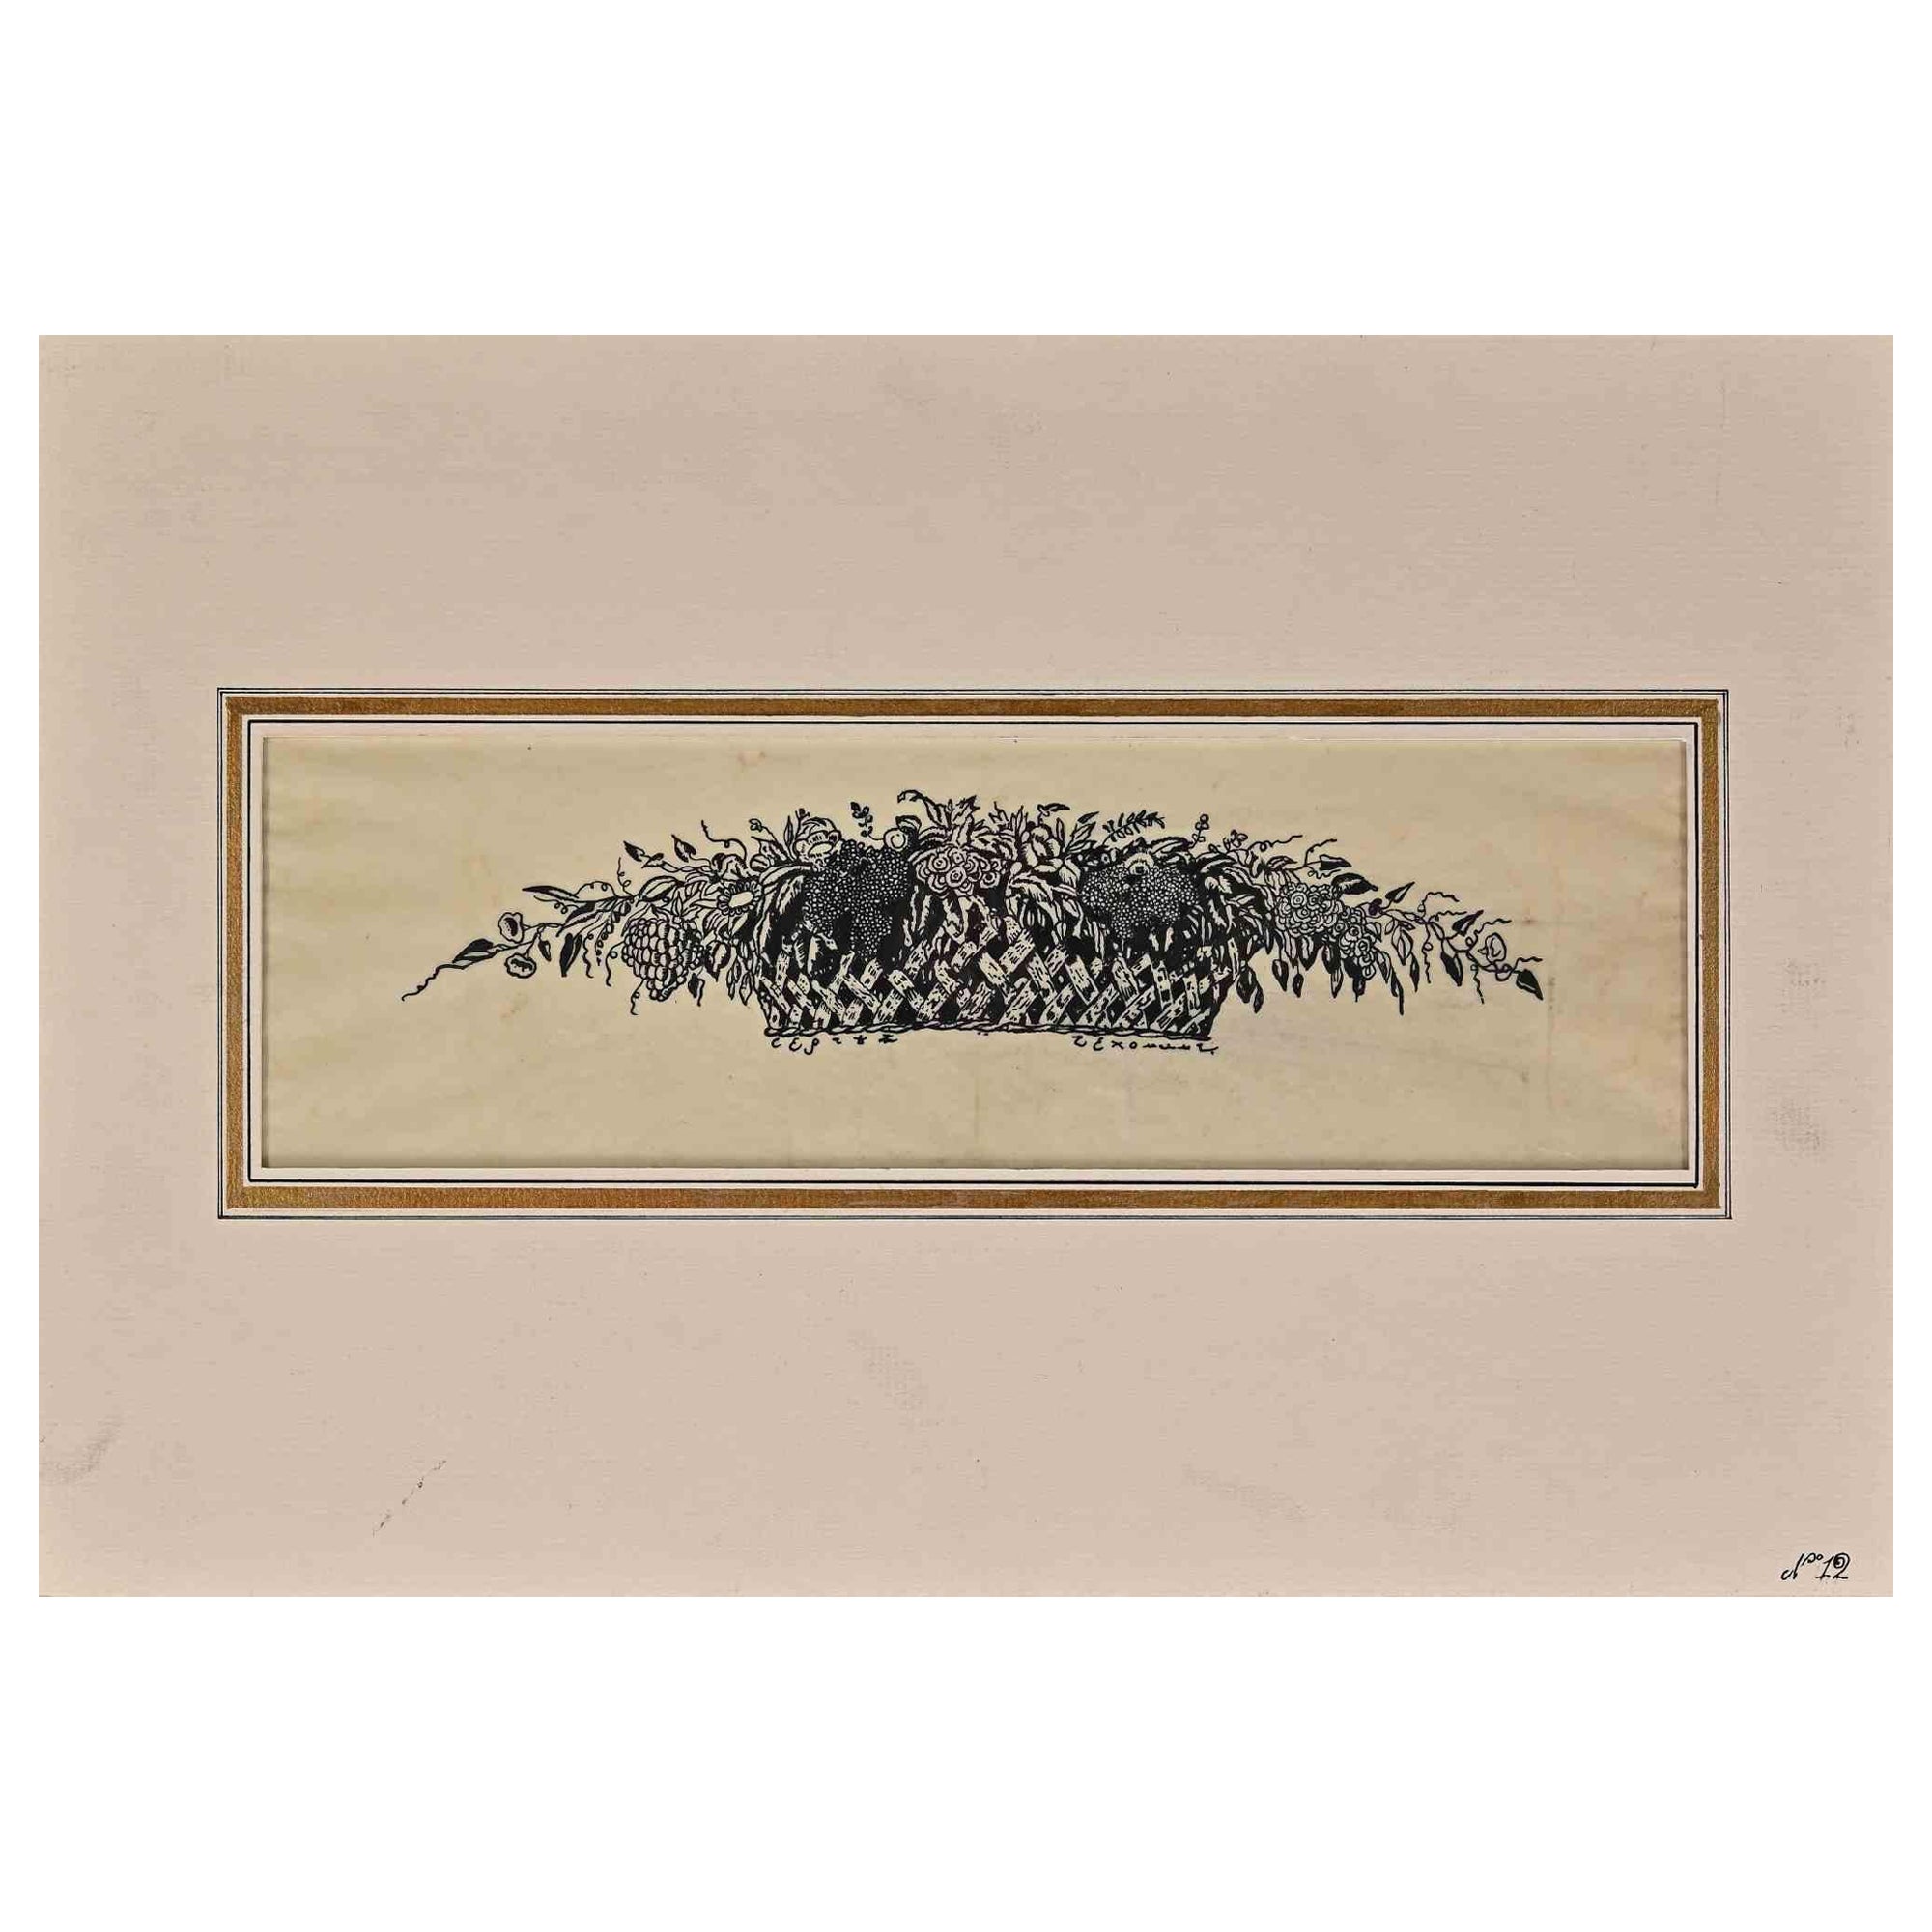 Panier de Fleurs is an Original China Ink on trading paper, realized by Serguei Vassiliévitch Tchekhonine.

Good condition on a trading yellowed paper, included a white cardboard passpartout (30x43.5 cm).

Hand-signed by the artist under the